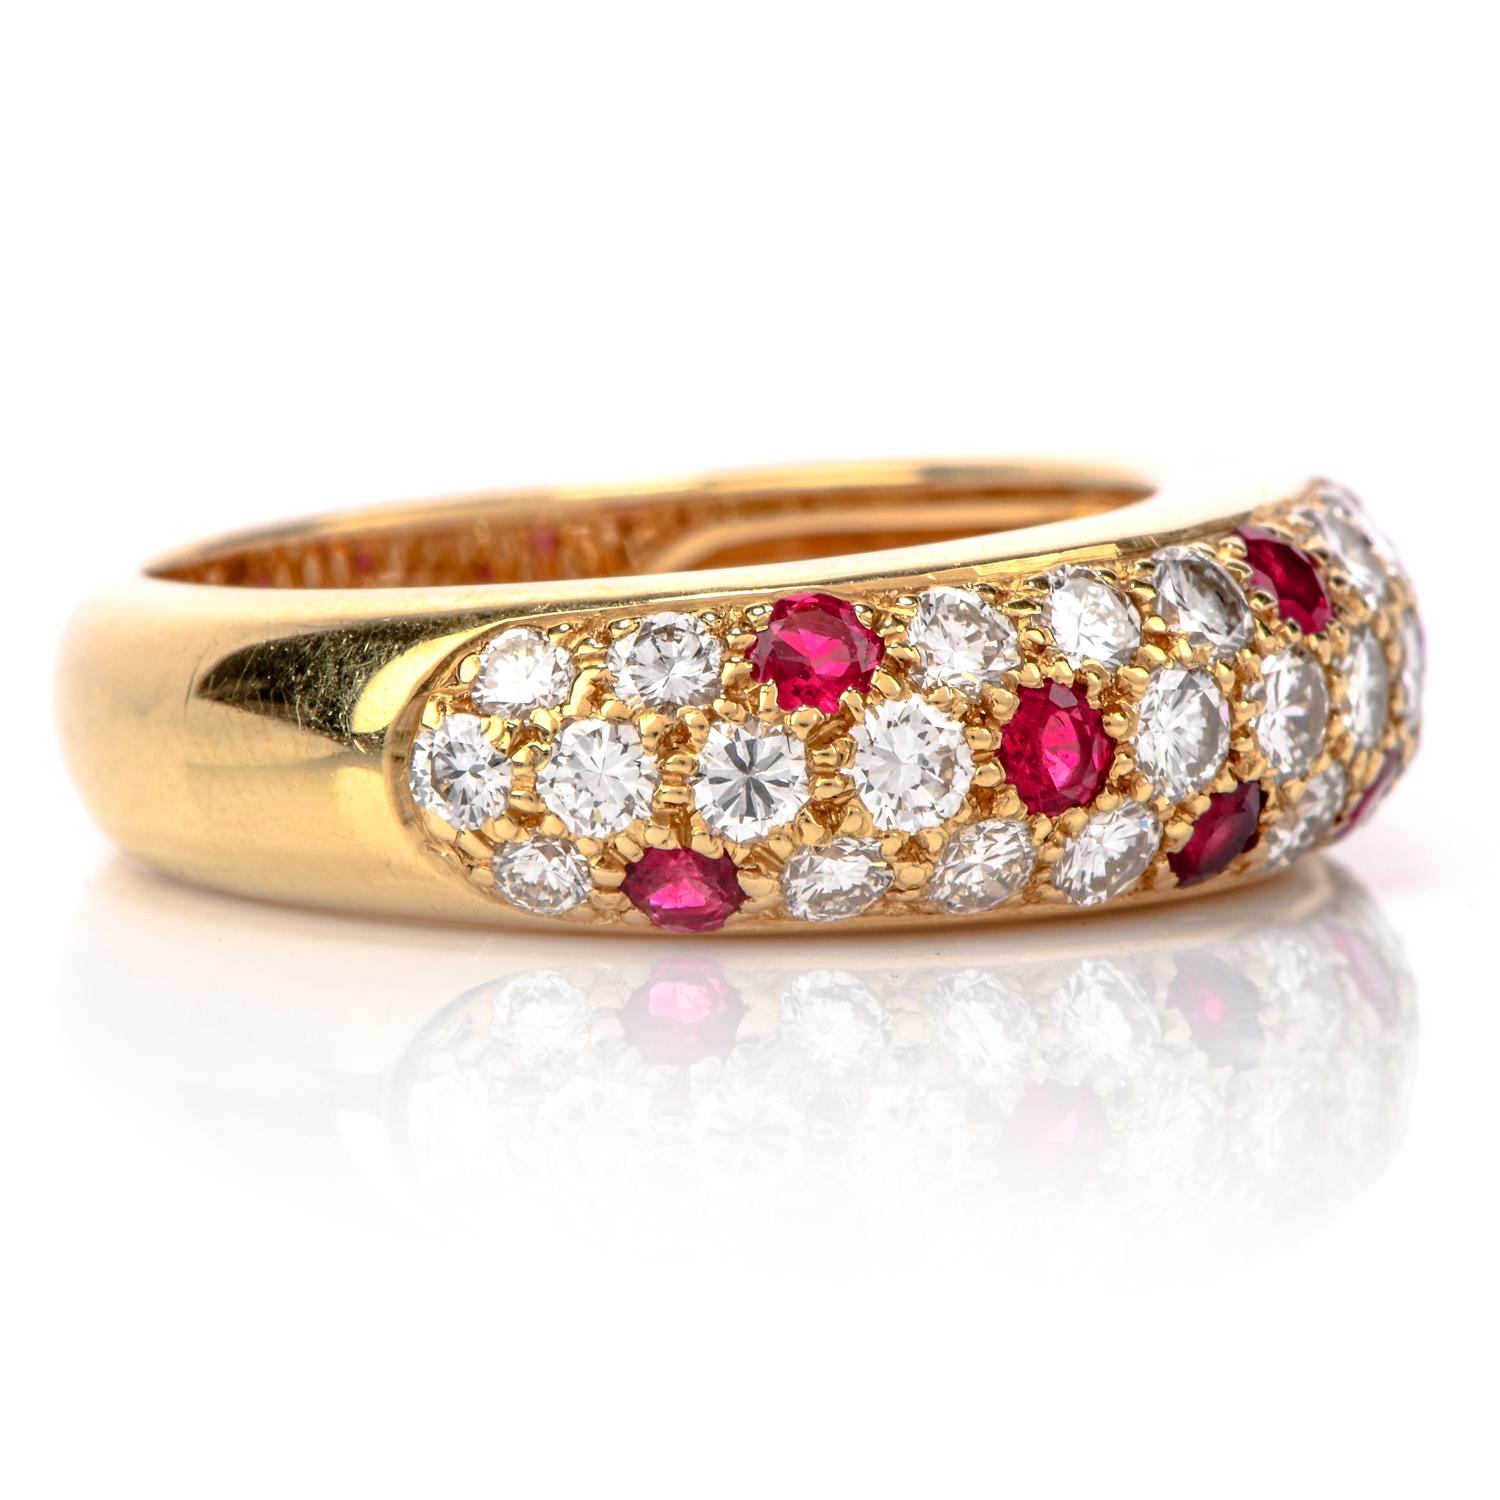 Adore this 90s Vintage Cartier Diamond Ruby 18K Gold Pave Bombe Band Ring!  This ring is crafted in 18 karat yellow gold by the prestigious Cartier brand.  This French made beautiful ring has 34 genuine round cut diamonds, pave set, of approximately